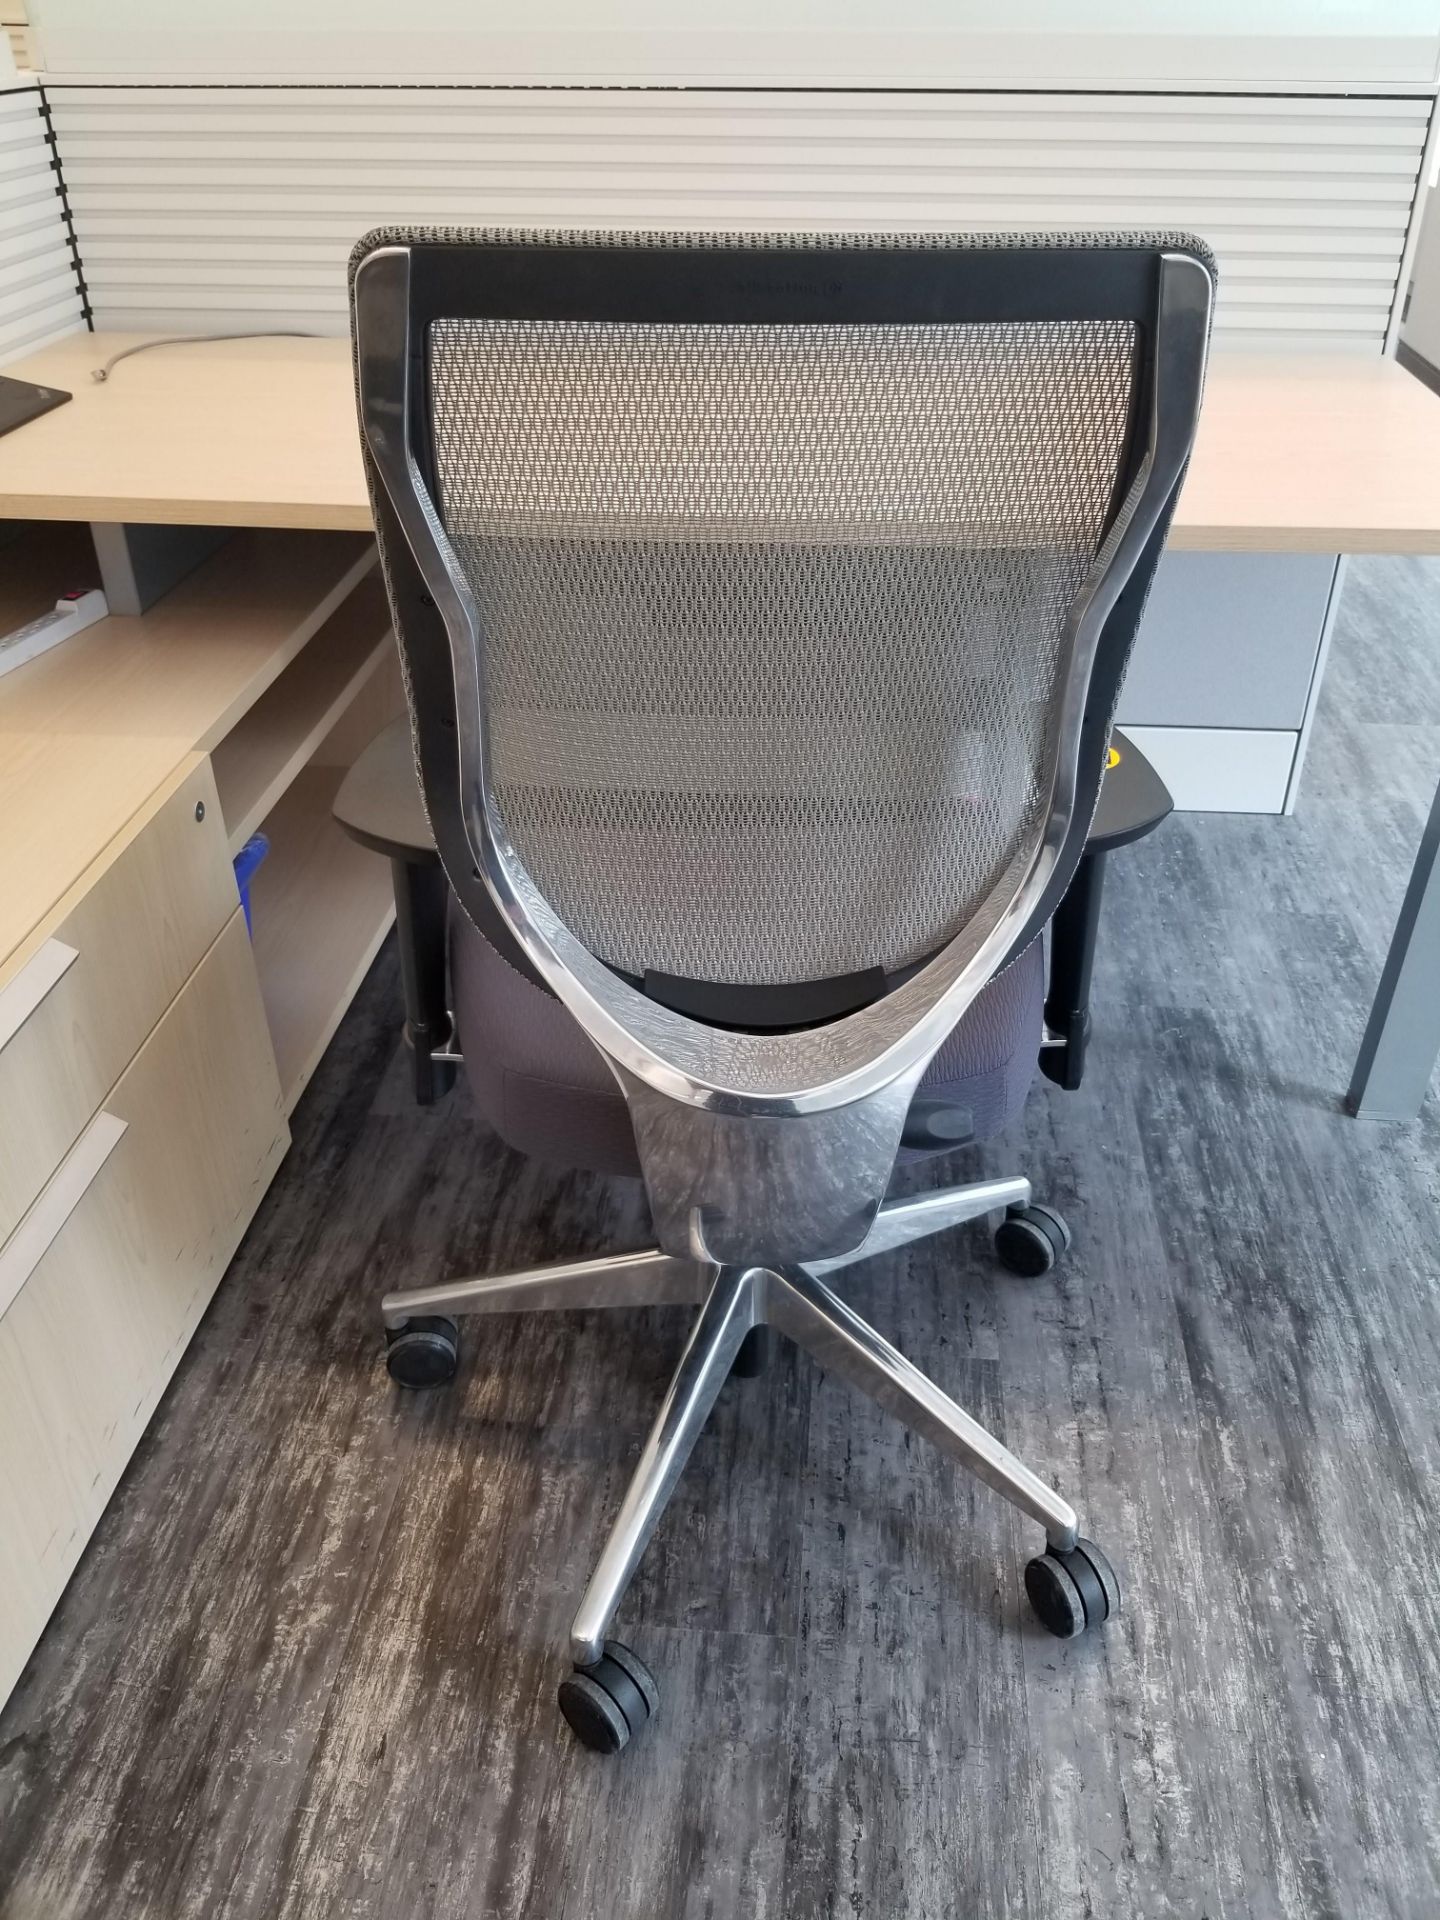 ALLSEATING - EXEC. CHAIR ON CASTERS, GREY W/ MESH BACK, ADJUSTABLE HEIGHT, ADJUSTABLE ARMS - Image 2 of 6